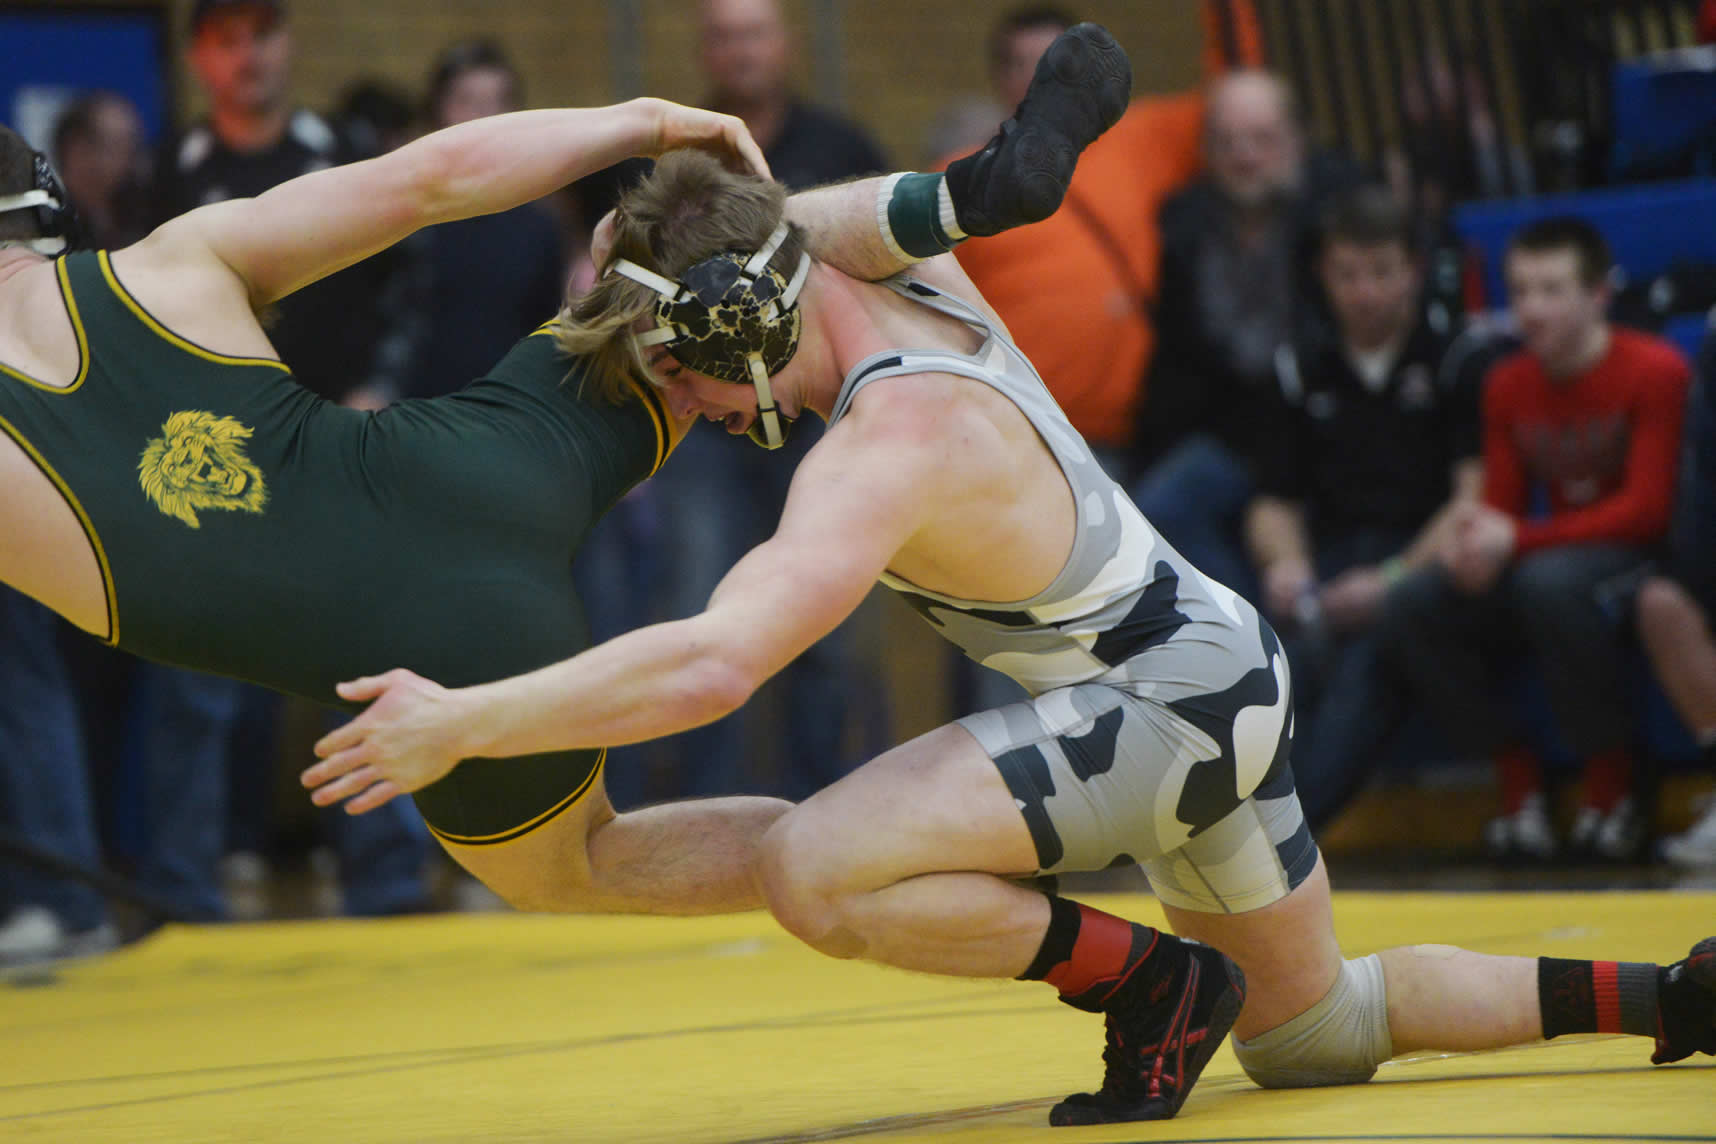 Union's Tommy Strassenberg heaves West Linn's Sean Harman during the Pac-Coast wrestling tournament at Mountain View High School on Friday, December 30, 2016. Harman beat Strassenberg to win the 160-pound weight class.